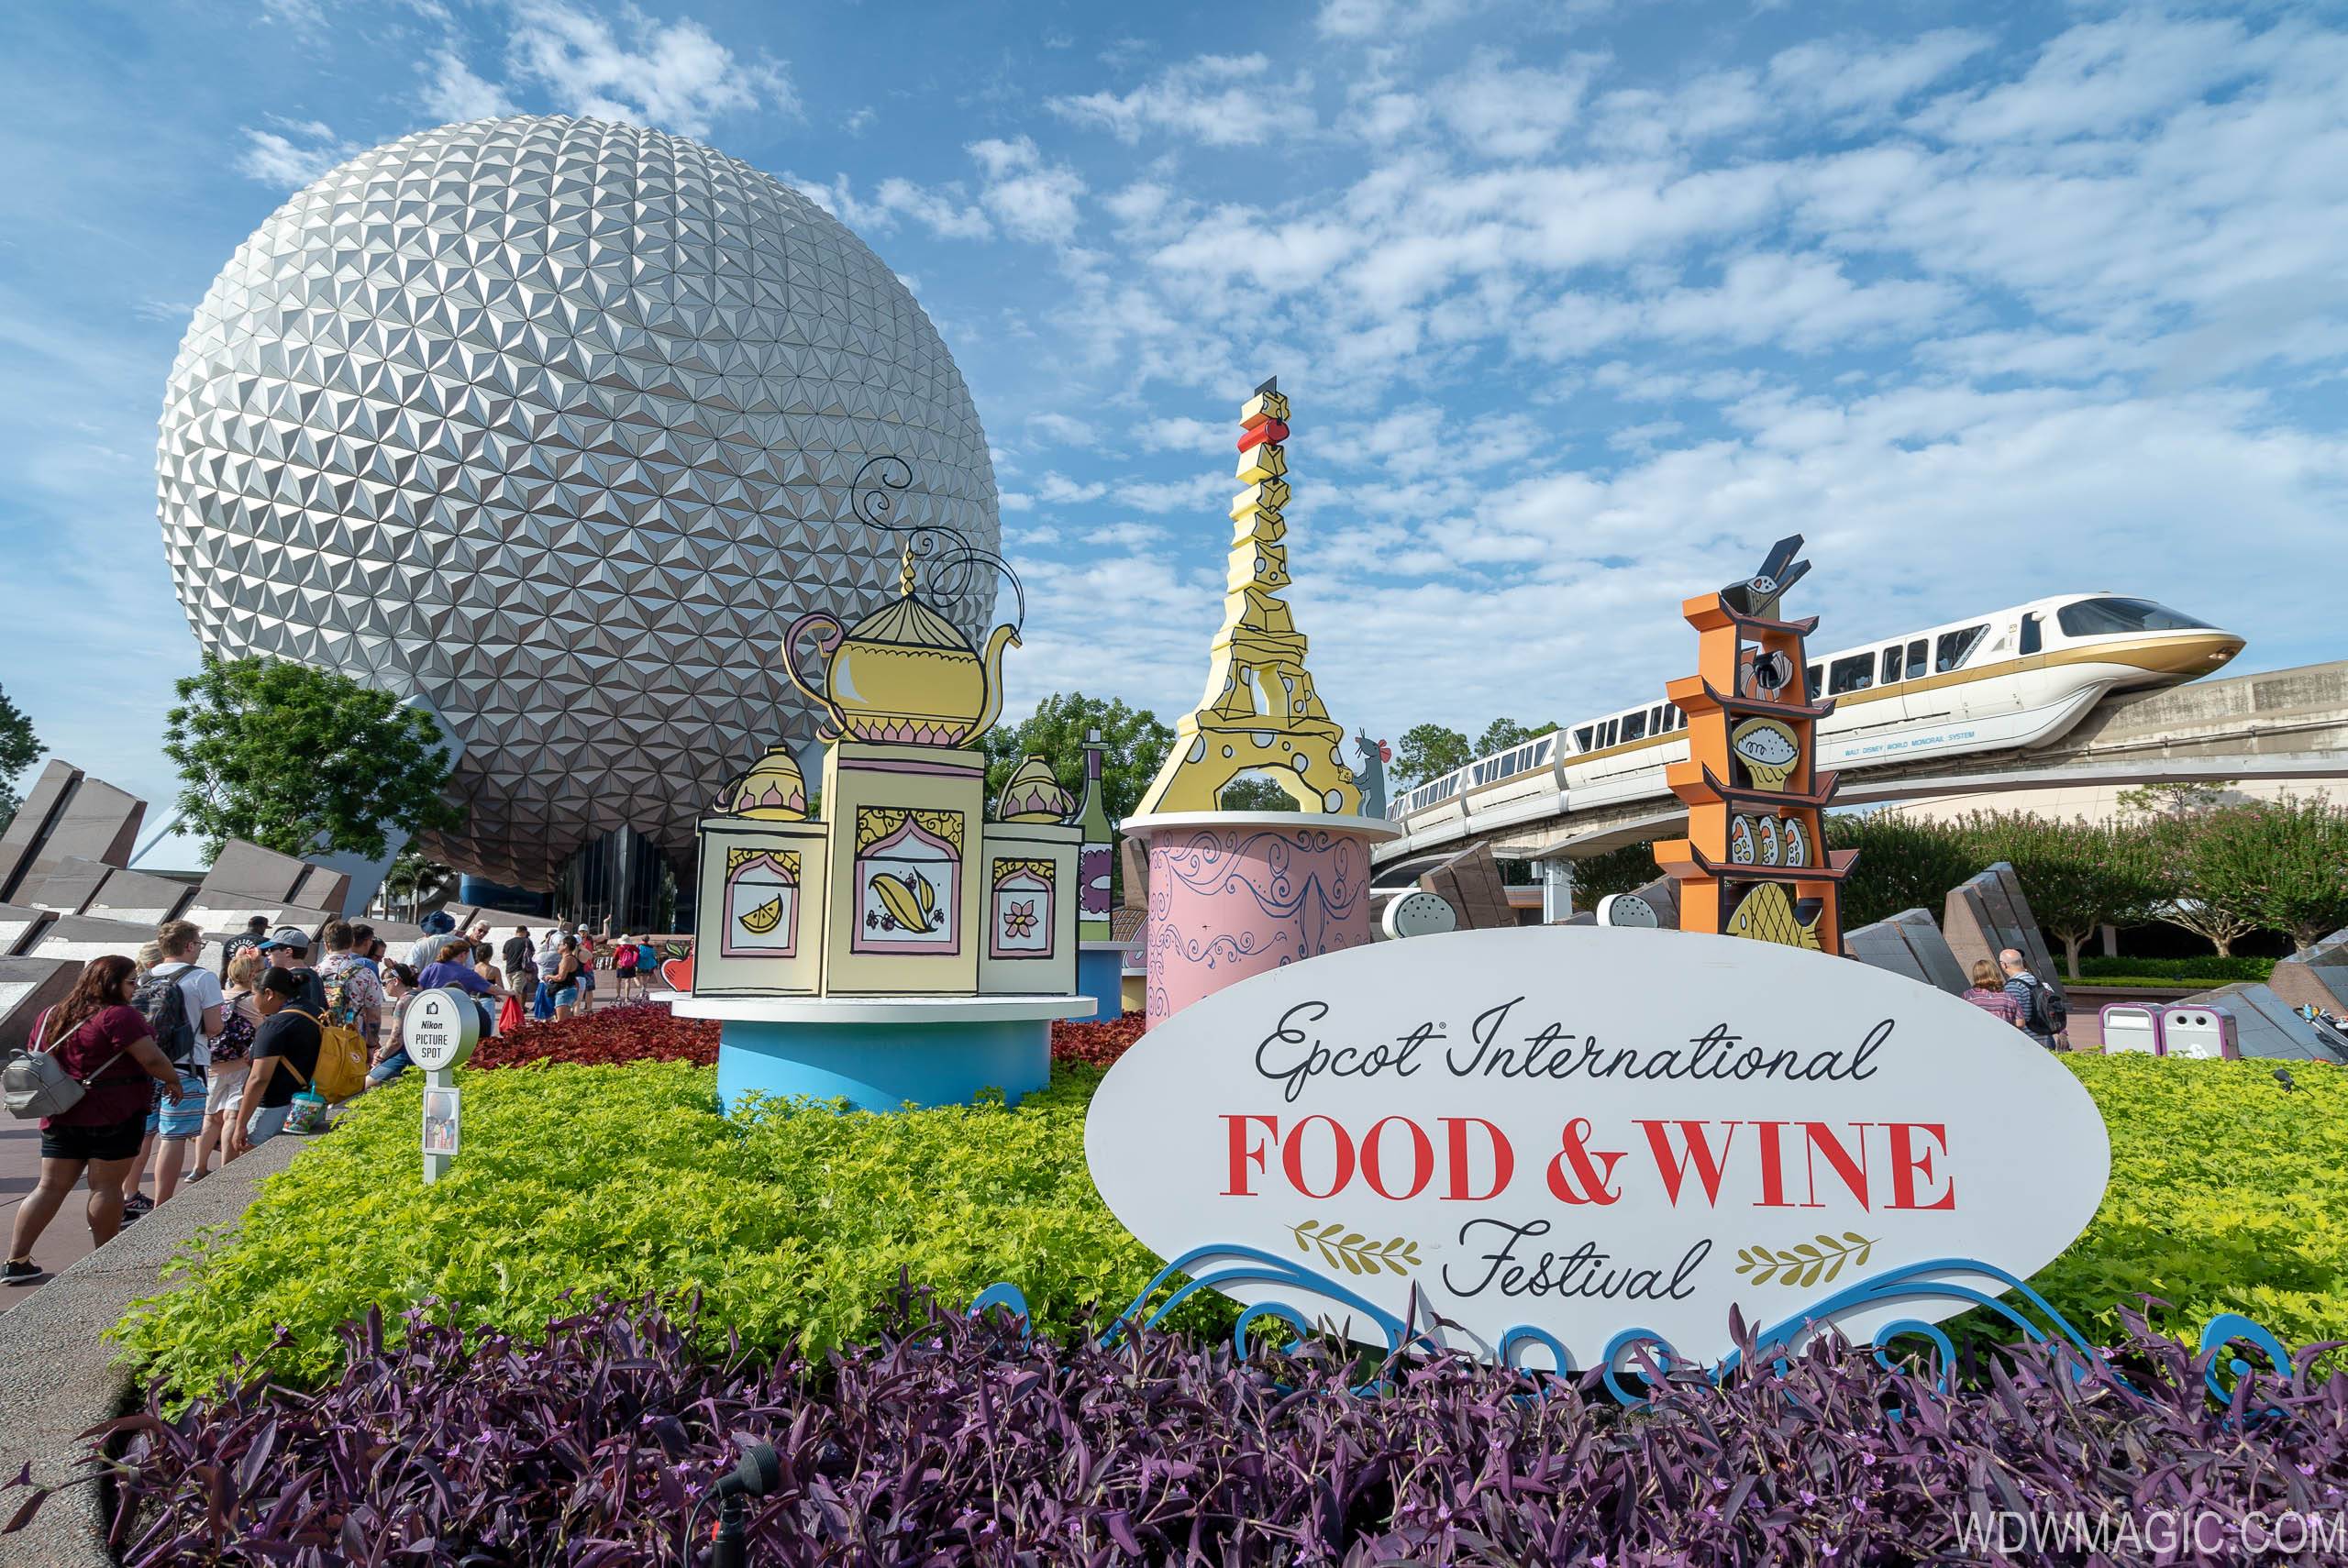 V.I.PASSHOLDER night is coming to Epcot